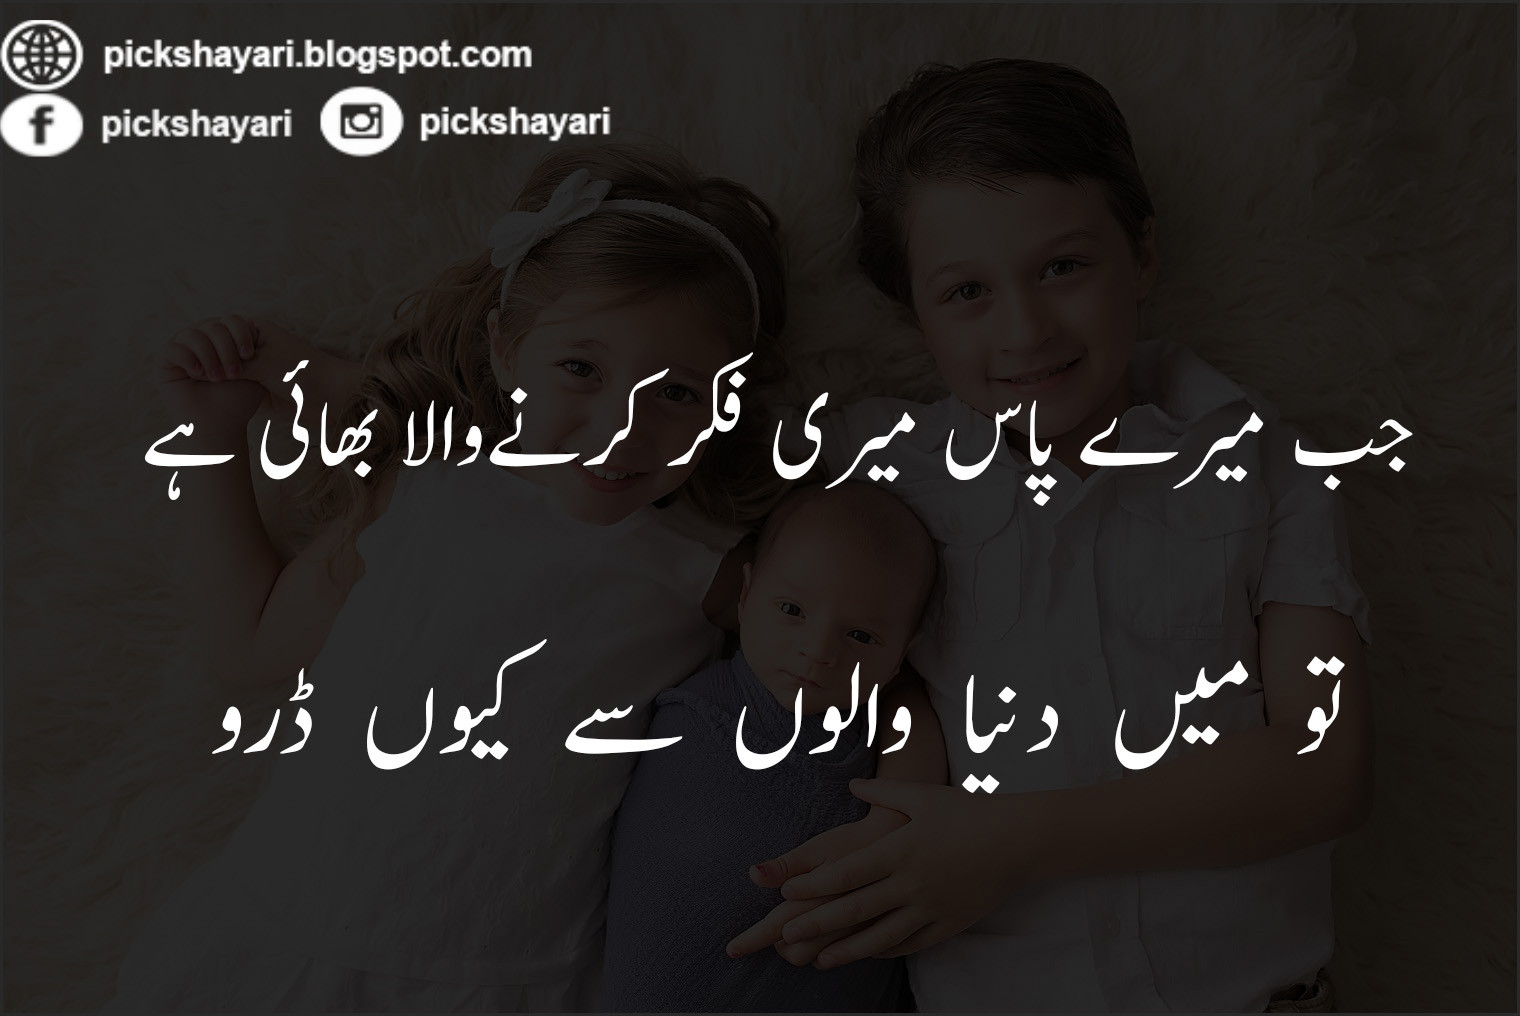 Brothers And Sister Love Quotes
 Sister and Brother Love Quotes in Urdu